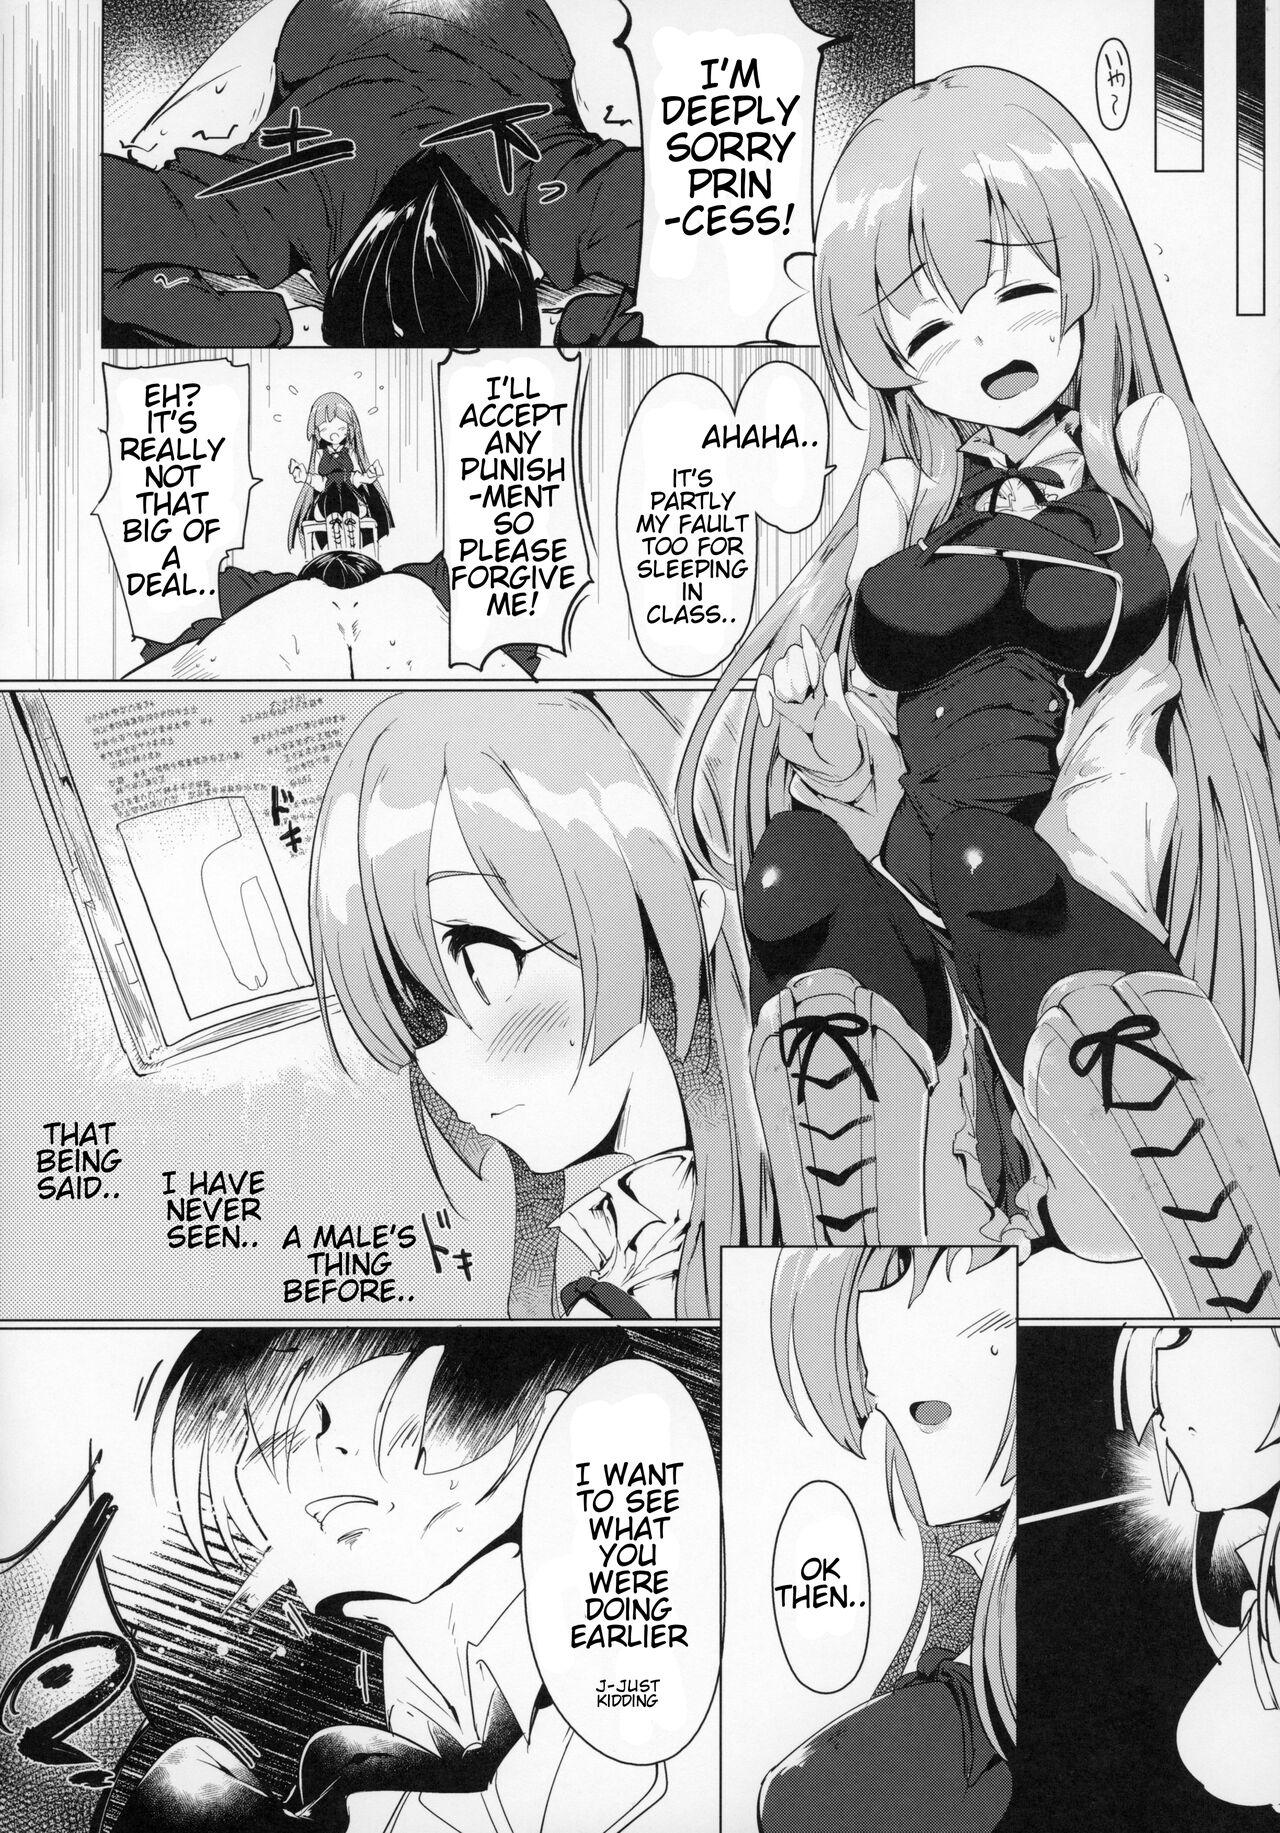 Fat There's No Way An Ecchi Event Will Happen Between Me and the Princess of Manaria Kingdom! - Manaria friends Foda - Page 9